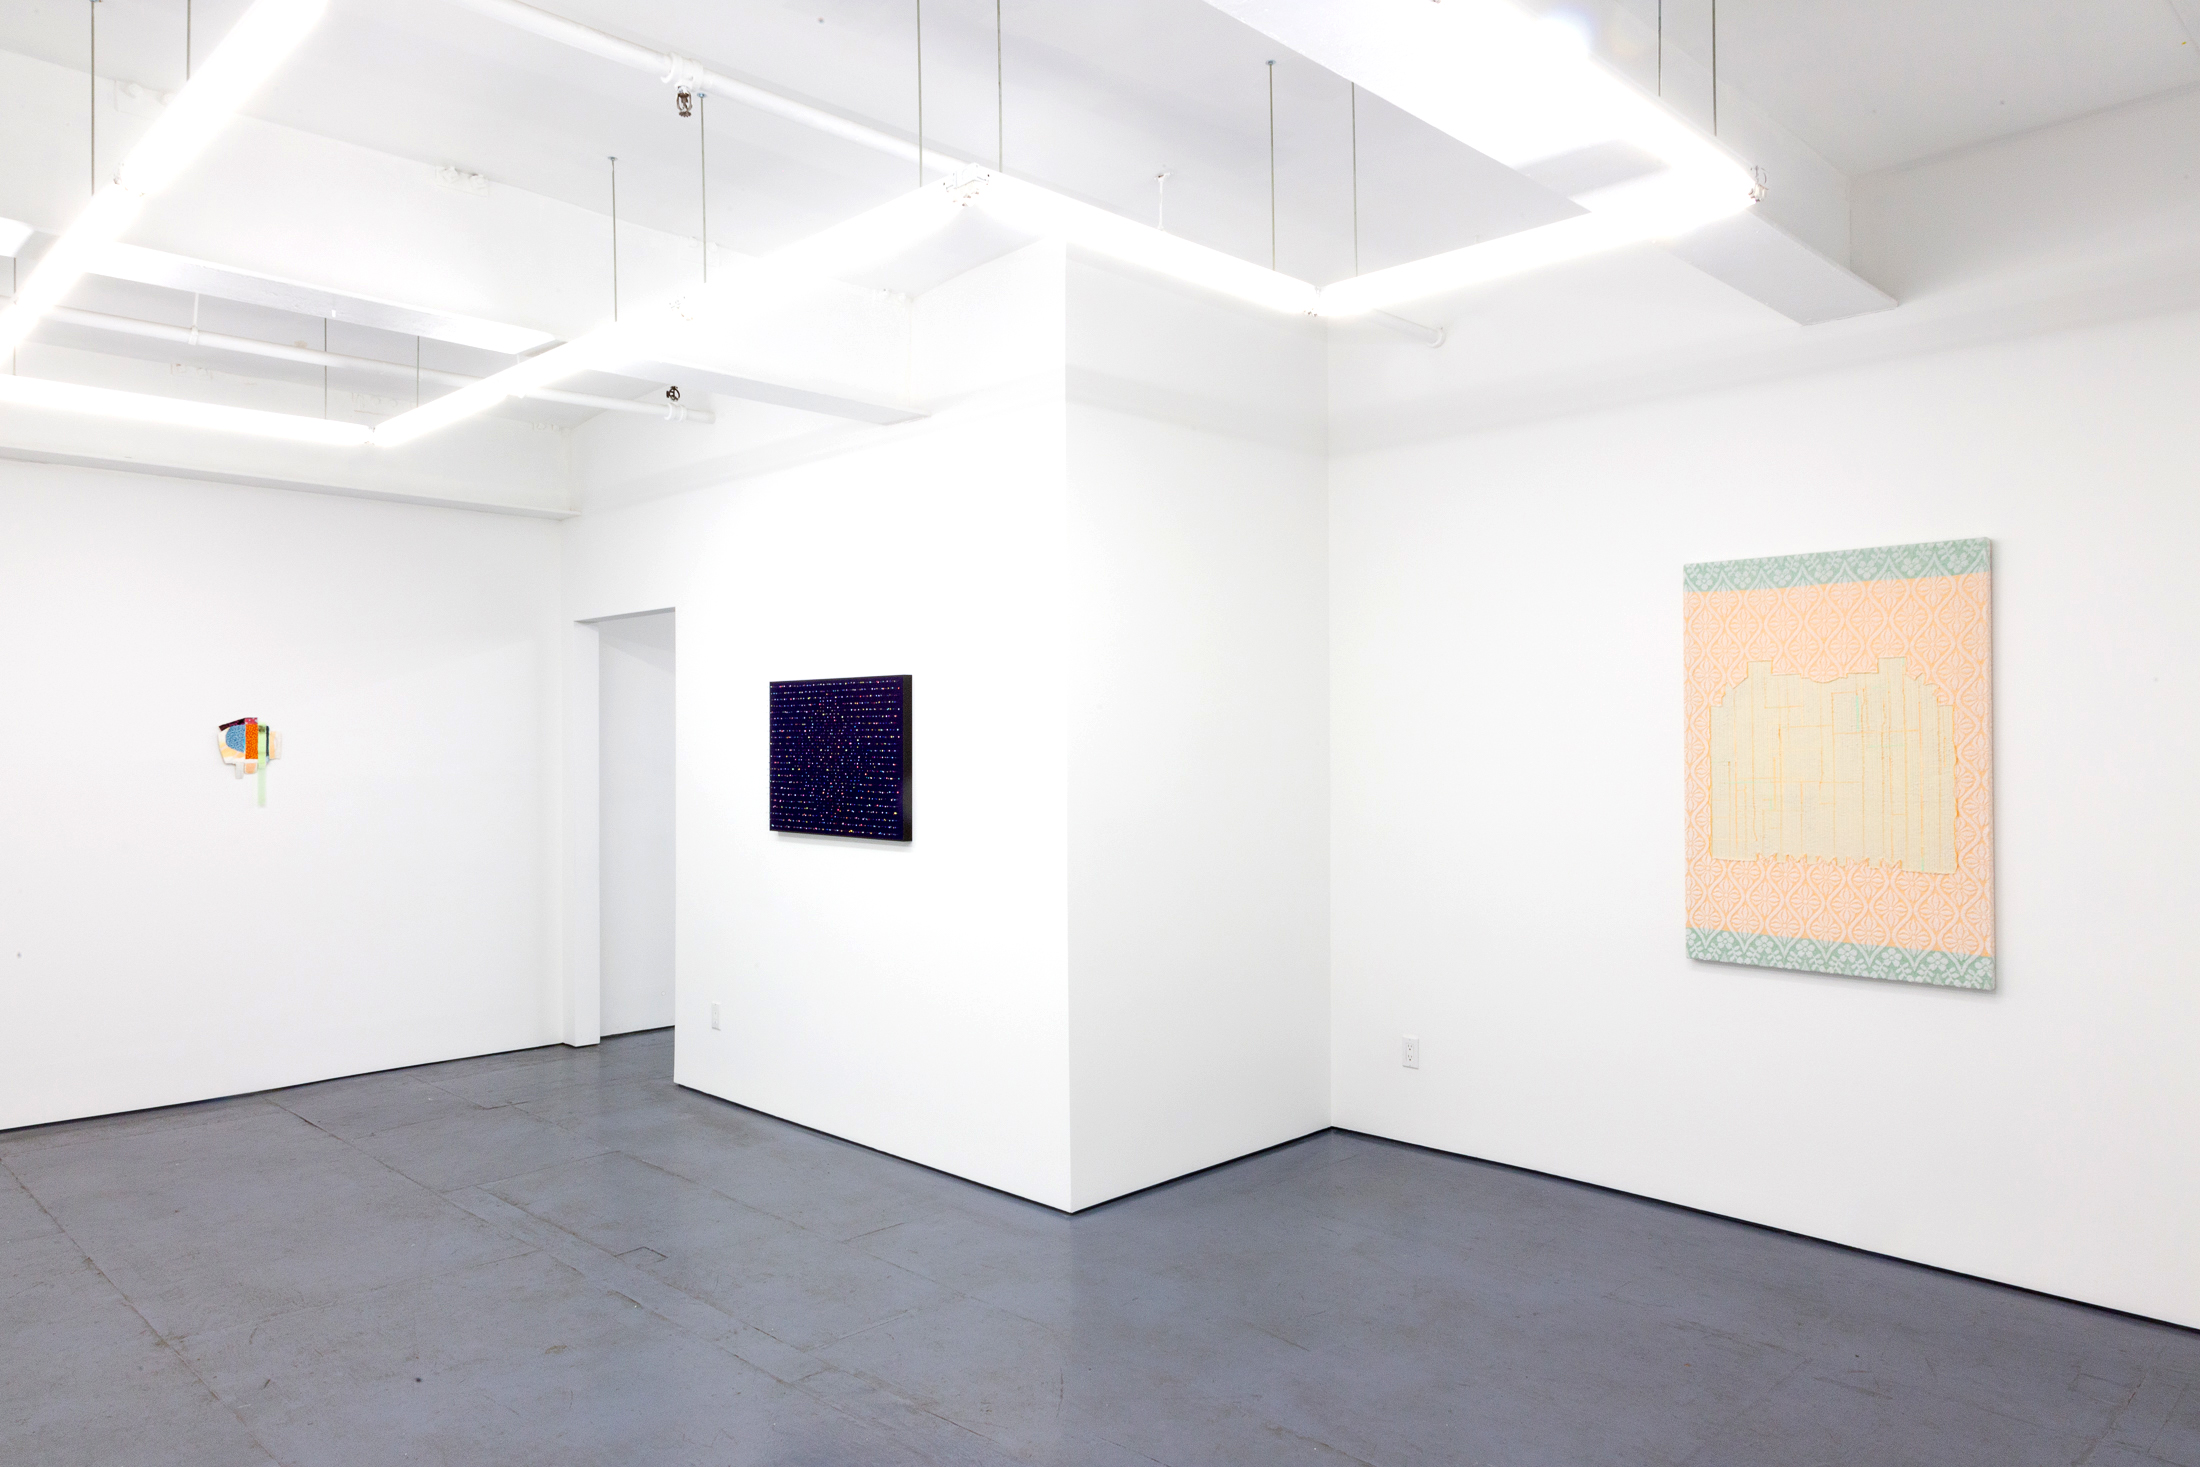  Installation view of Nestled in the Warm Embrace in “Painting” at Transmitter 